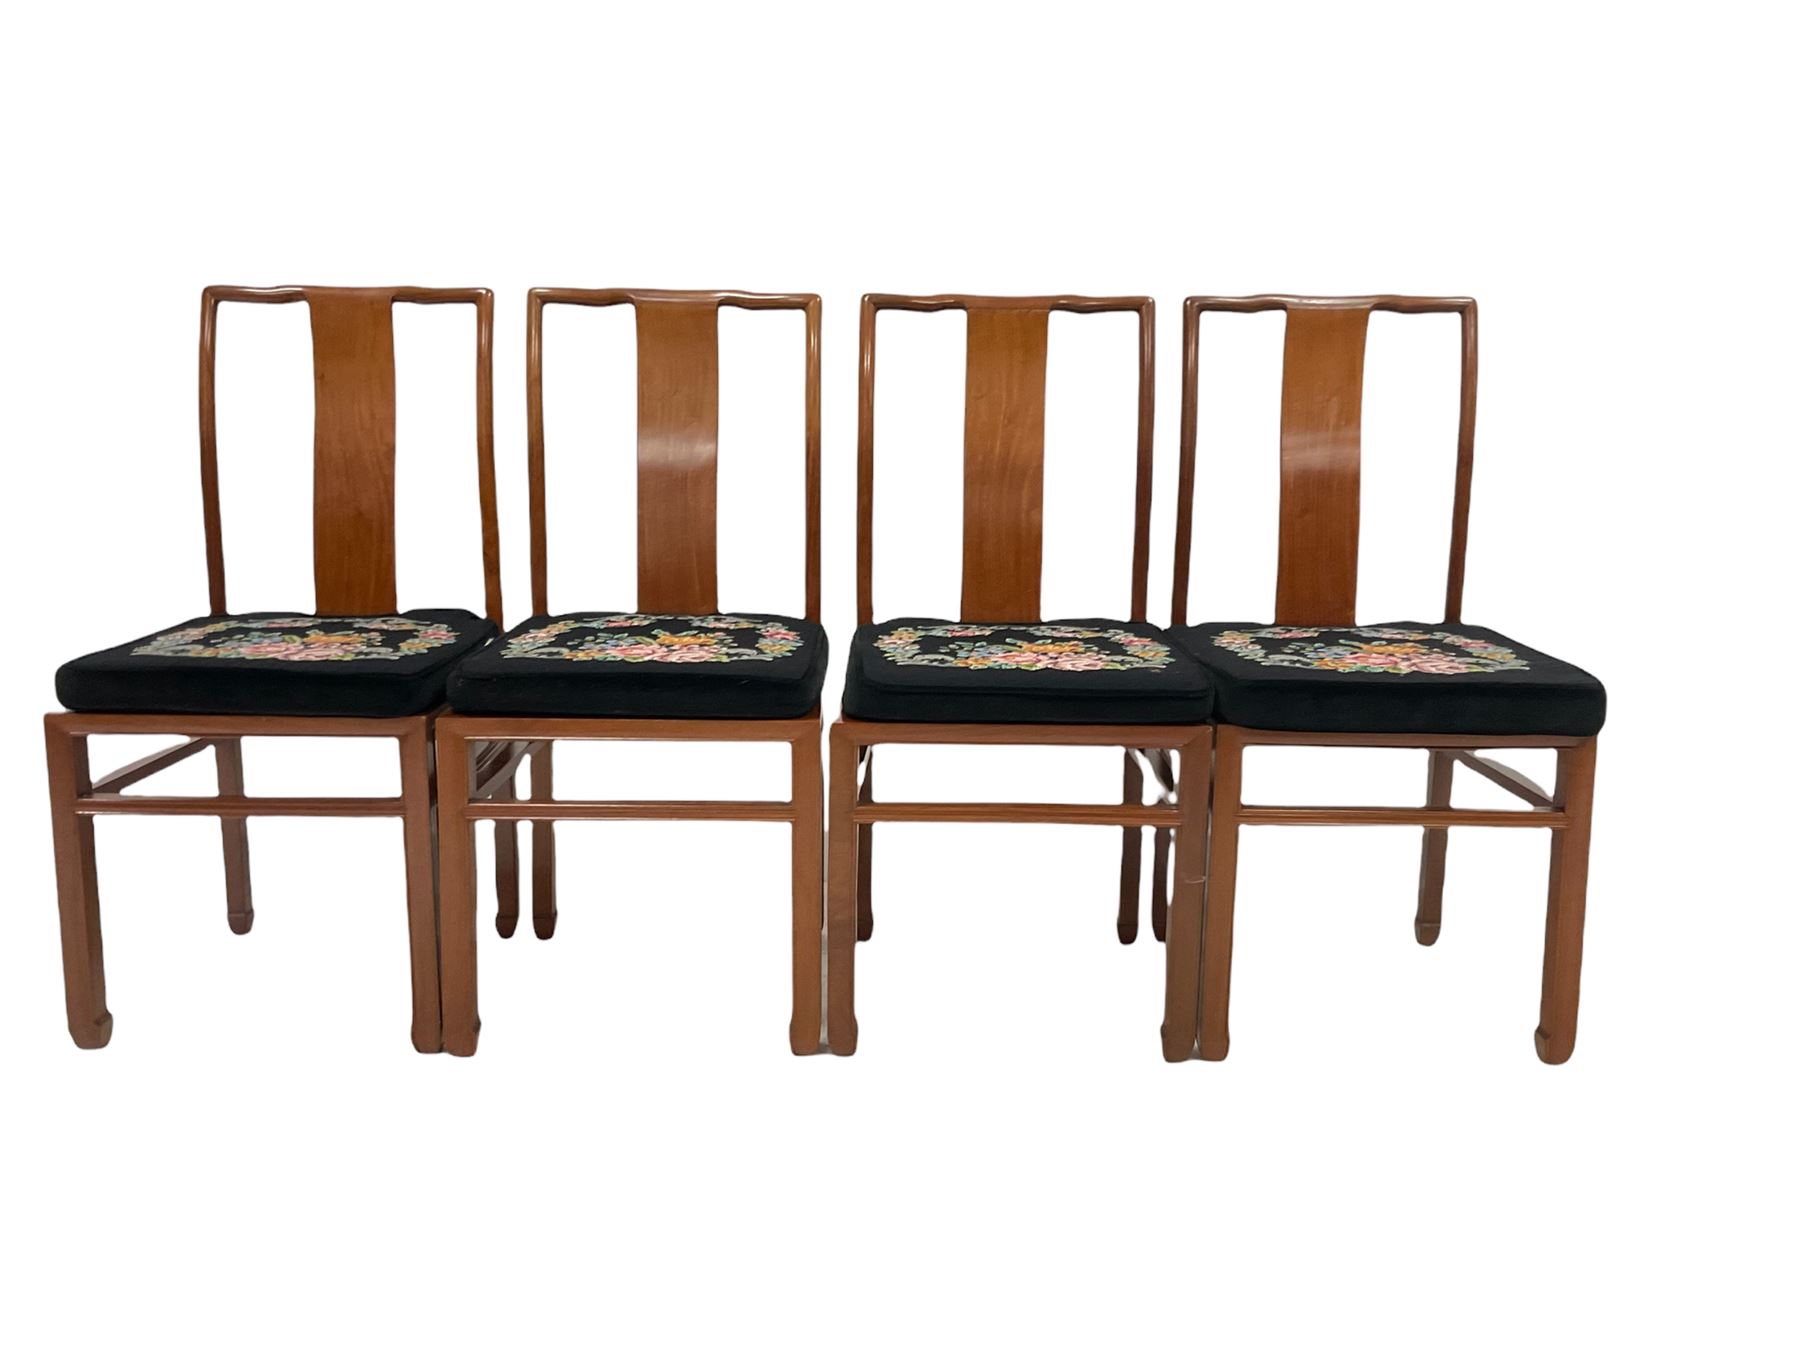 Contemporary Chinese rosewood extending dining table - Image 2 of 6